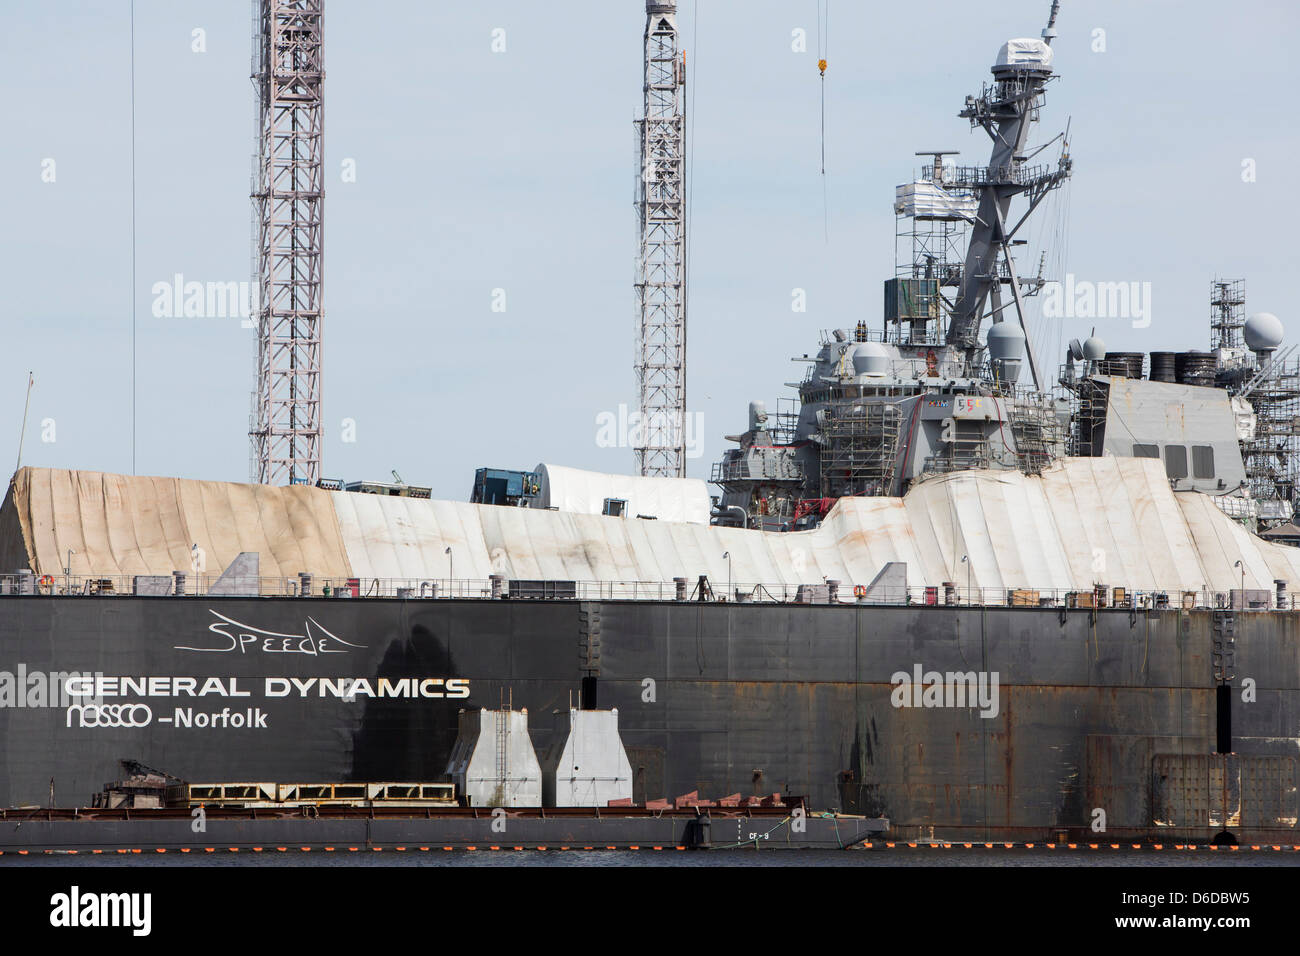 An Arleigh Burke class destroyer can be seen in a repair dry dock at the General Dynamics NASSCO shipyard in Norfolk, Virginia Stock Photo